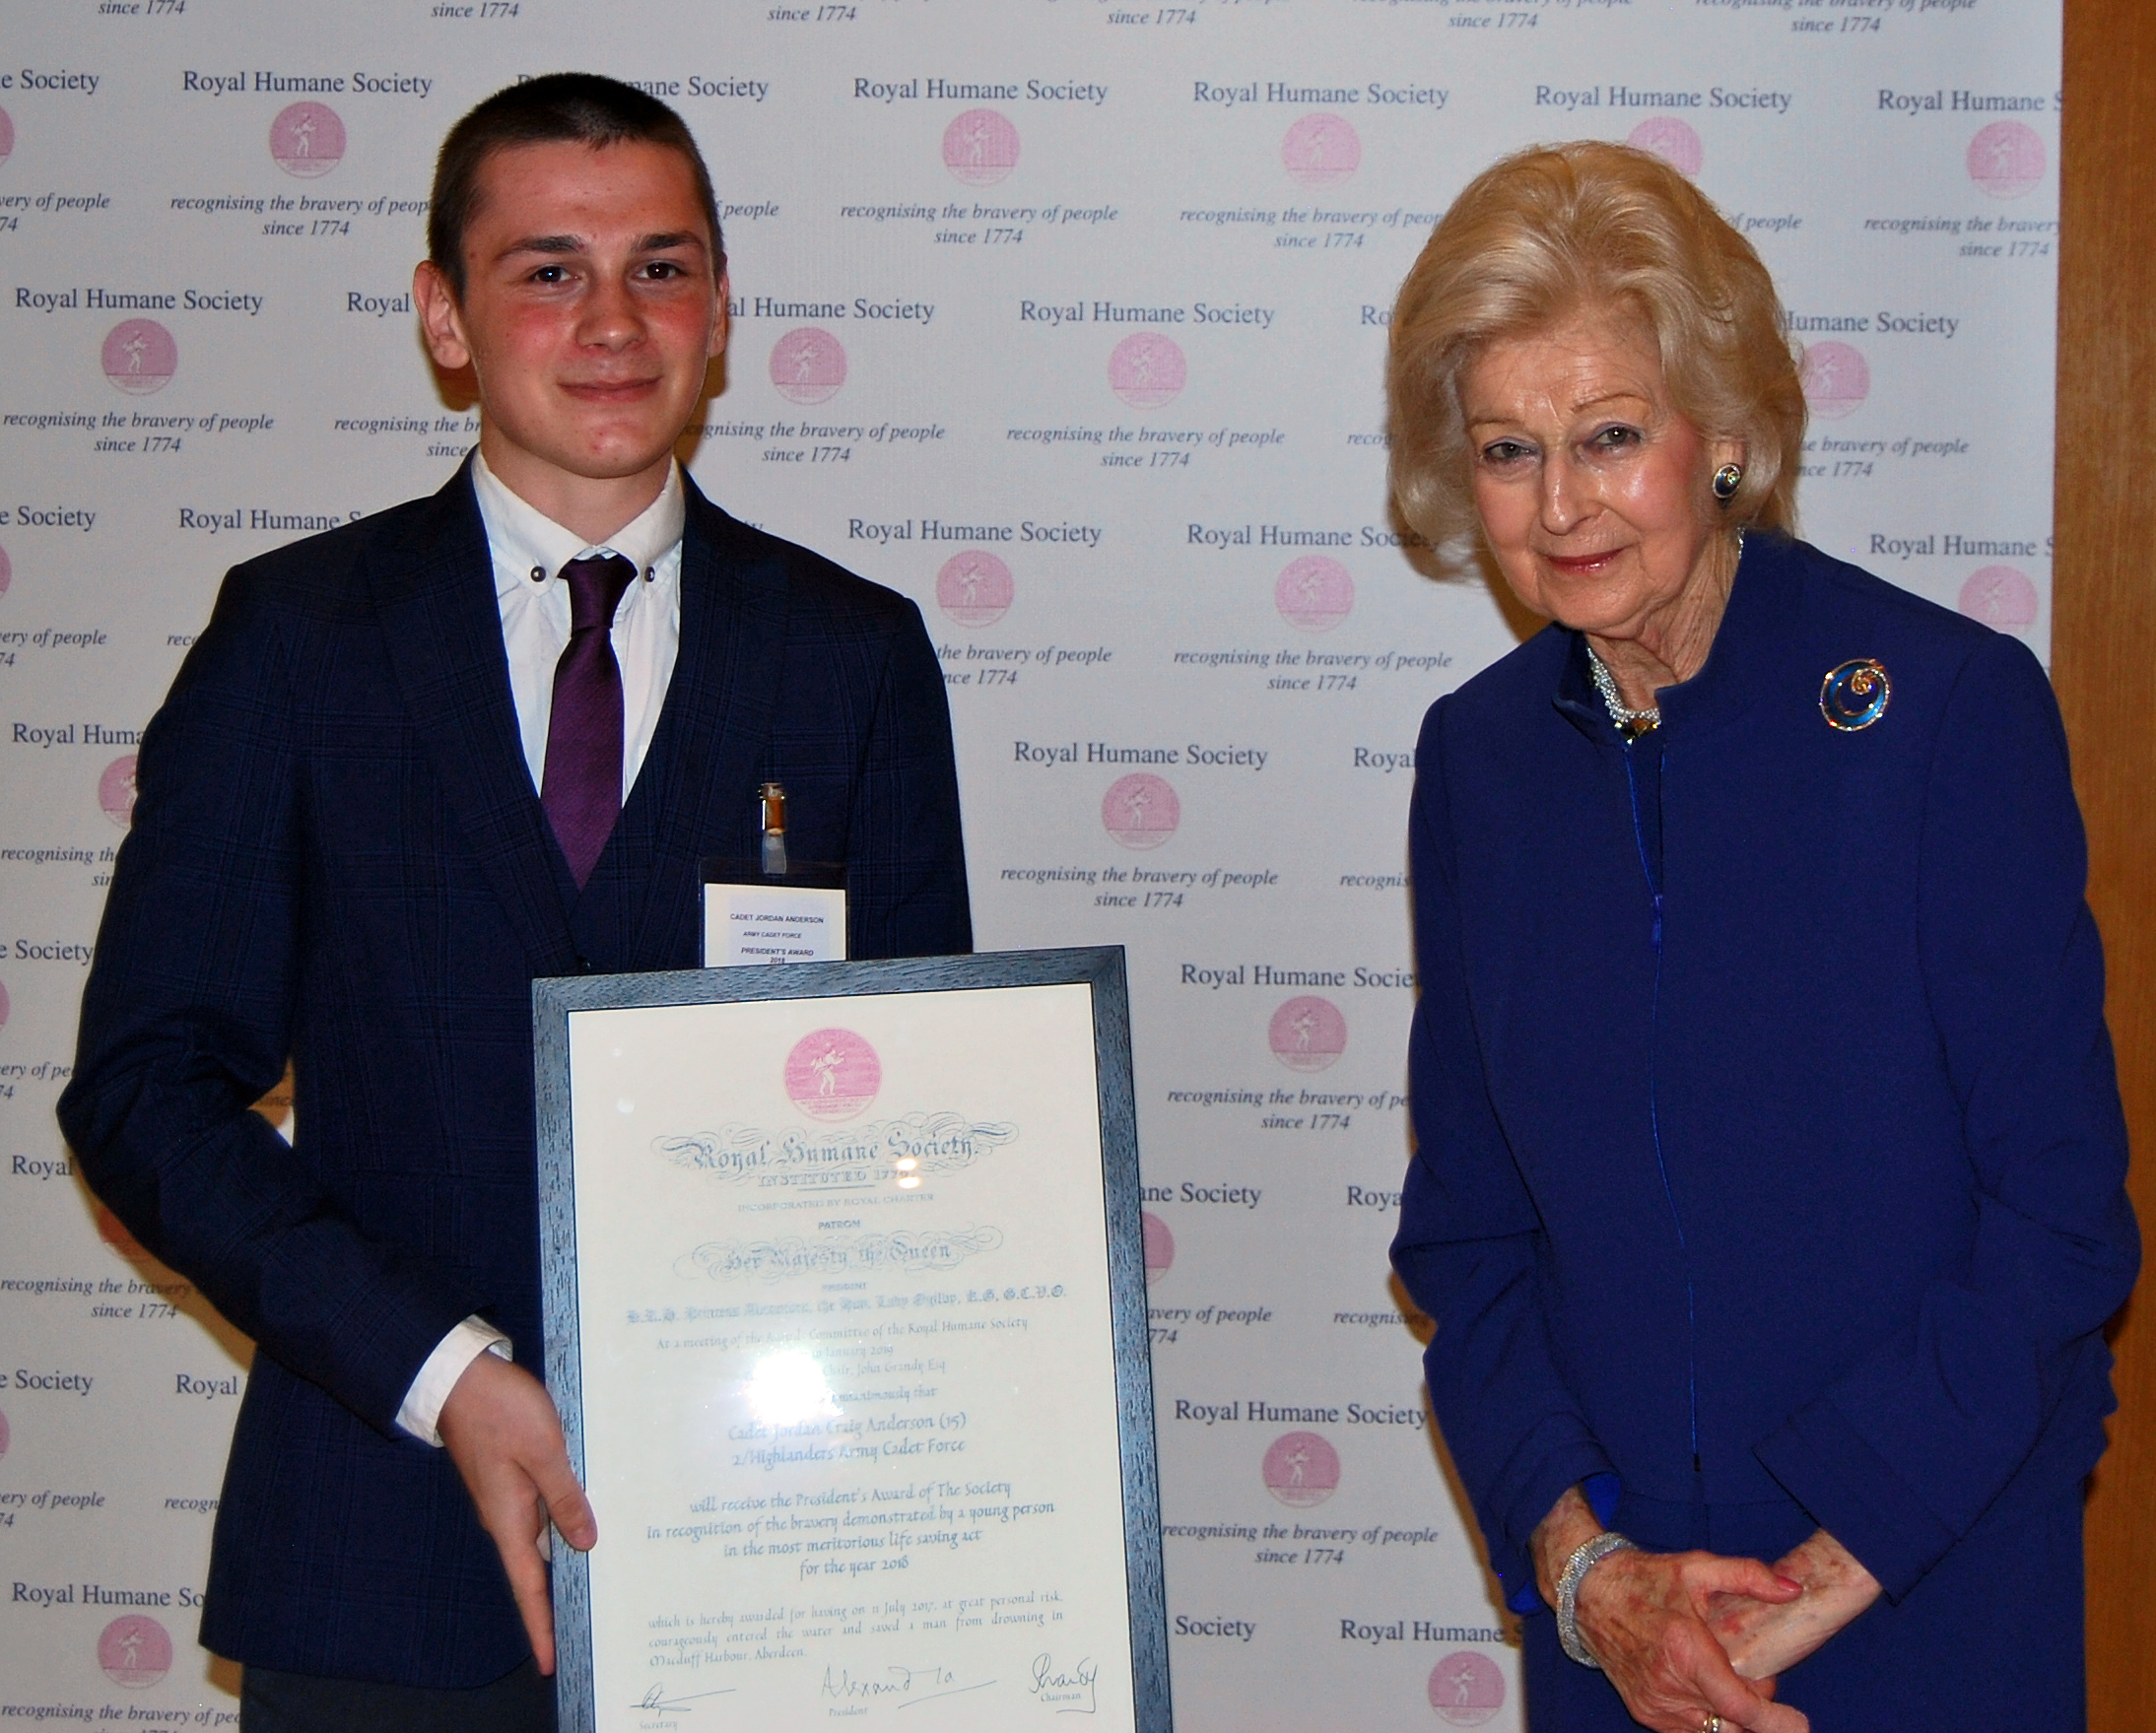 Jordan Anderson being presented with his award by Princess Alexandra.